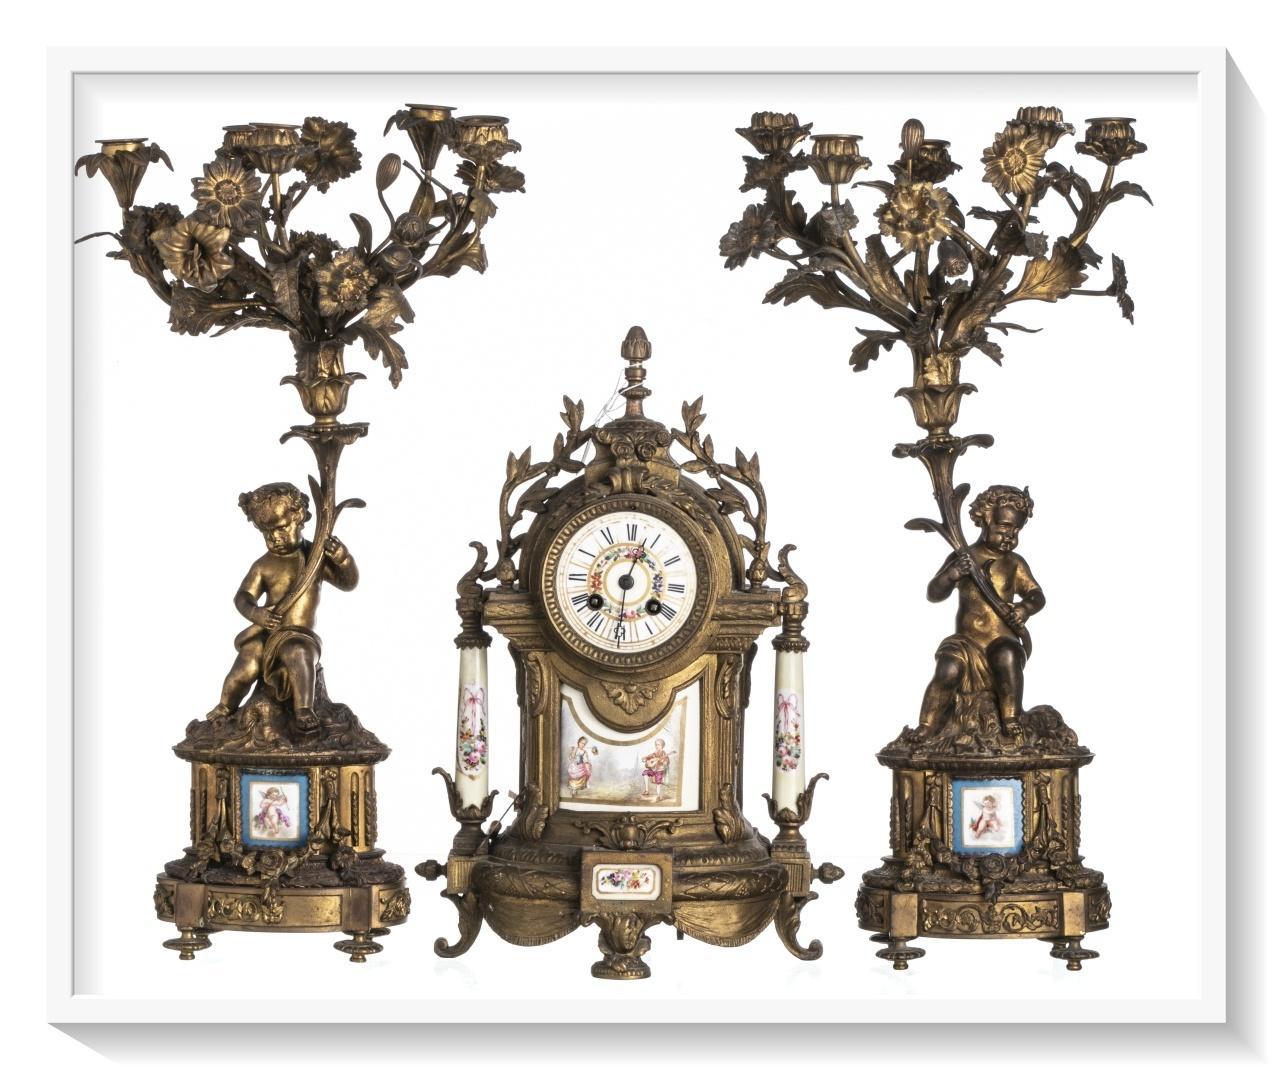 French Garnirure
19th Century,
 in gilded bronze, elements and plates by Sèvres. 
Composed of a table clock and a pair of five-fire candelabra, decorated with putti, flowers and plant motifs. 
Clock with Roman numerals.
Minor defects, in motion